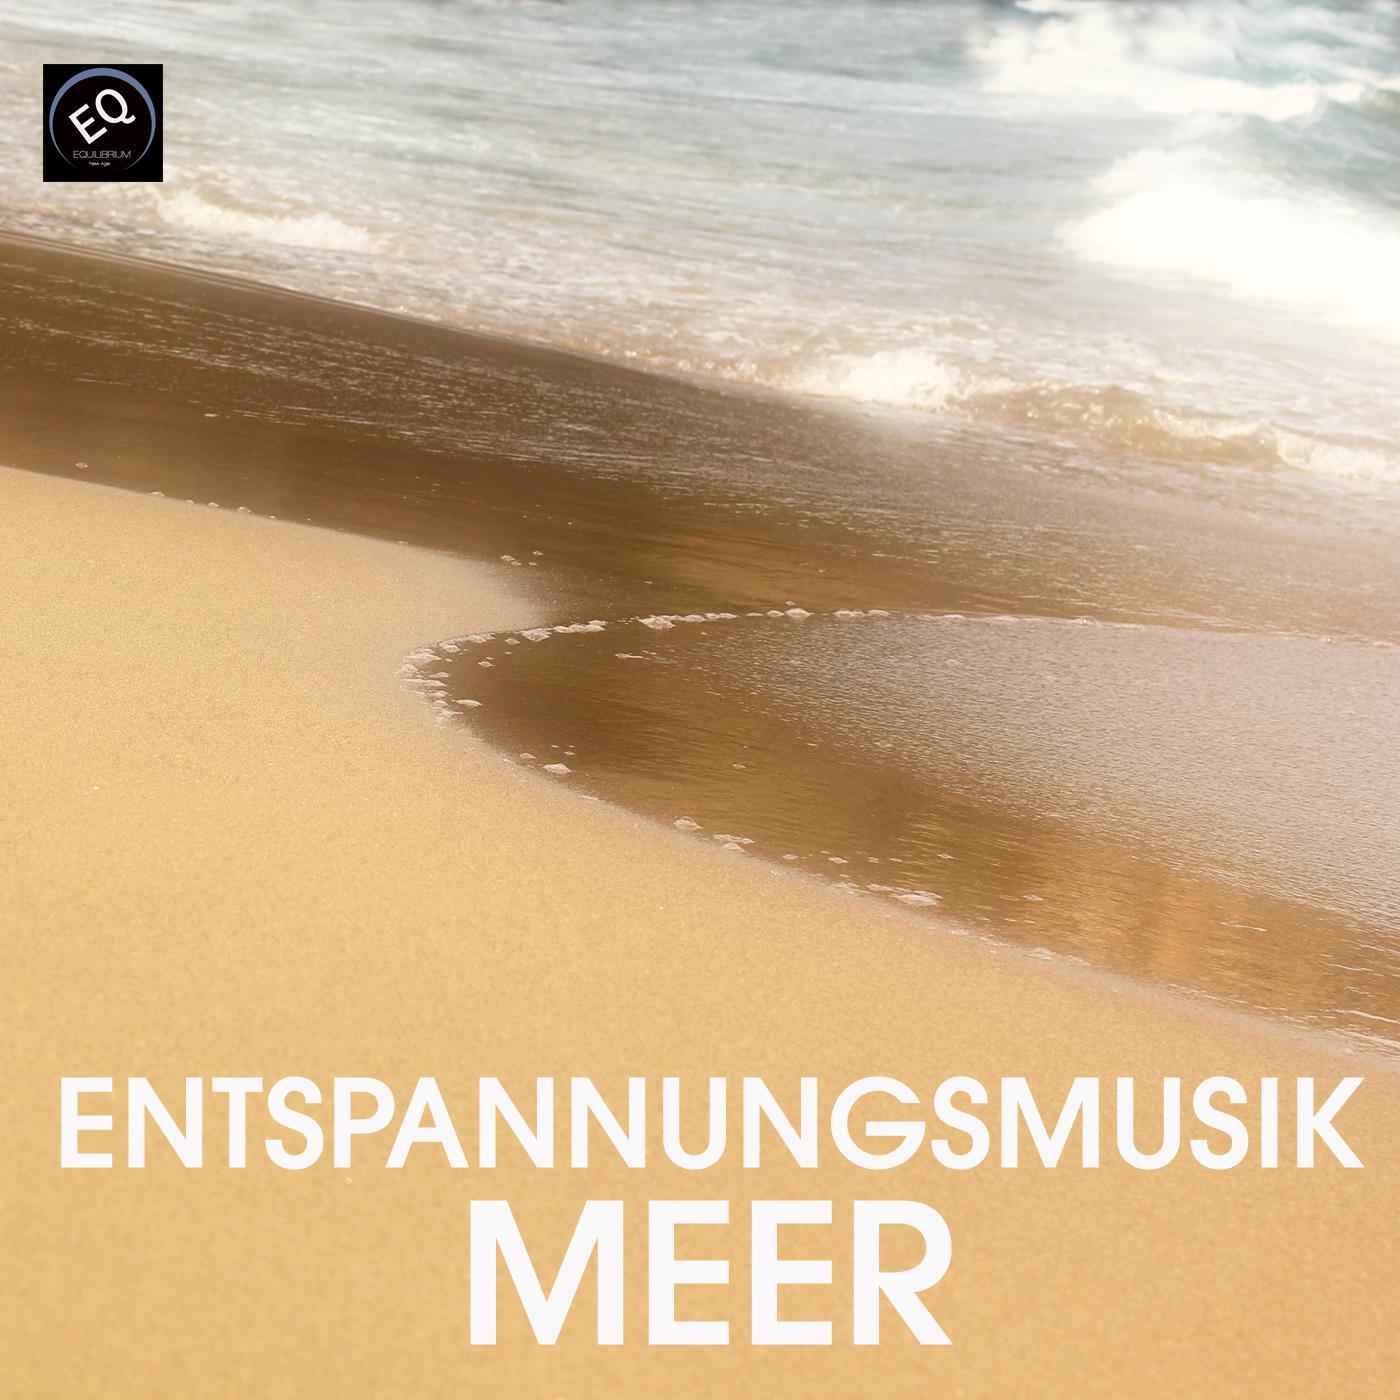 Am strand - Meeresrauschen 3 - Tropical Ocean Waves and Crickets for Relaxation and Dreaming. Ocean Sounds for Pure Tranquility Surface Waves